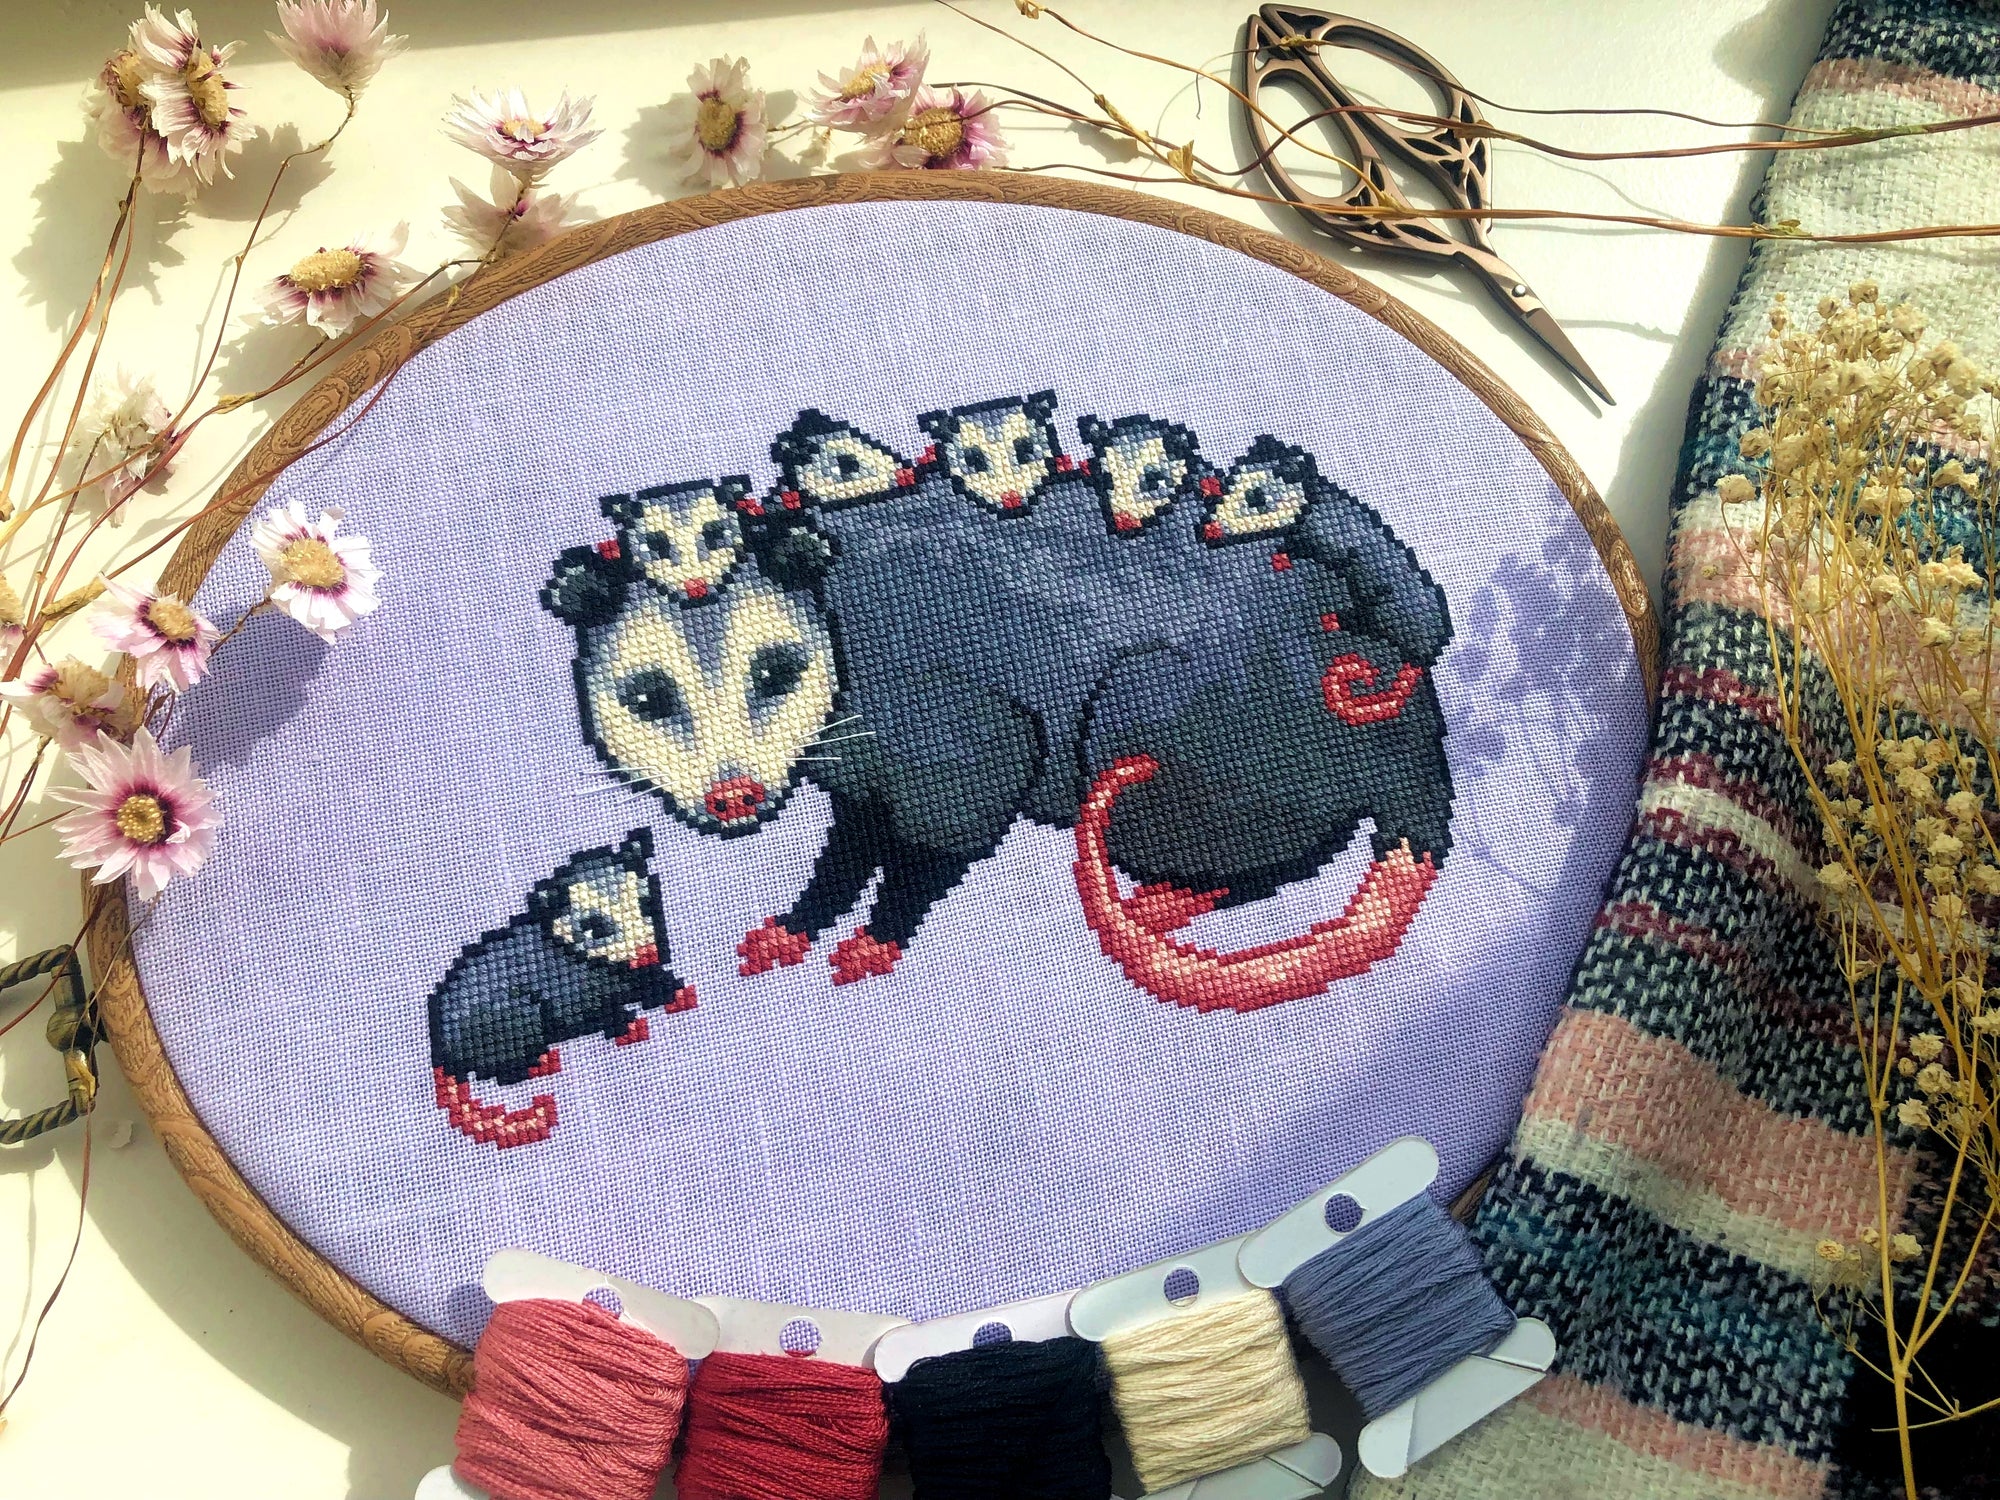 Front view of possum mama cross stitch pattern. The opossum mother has 6 babies, 5 of which are on her back. The 6th one is sitting on her left. Colors are mainly blueish grey, lilac, beige and pink. The baby possums are extremely cute.